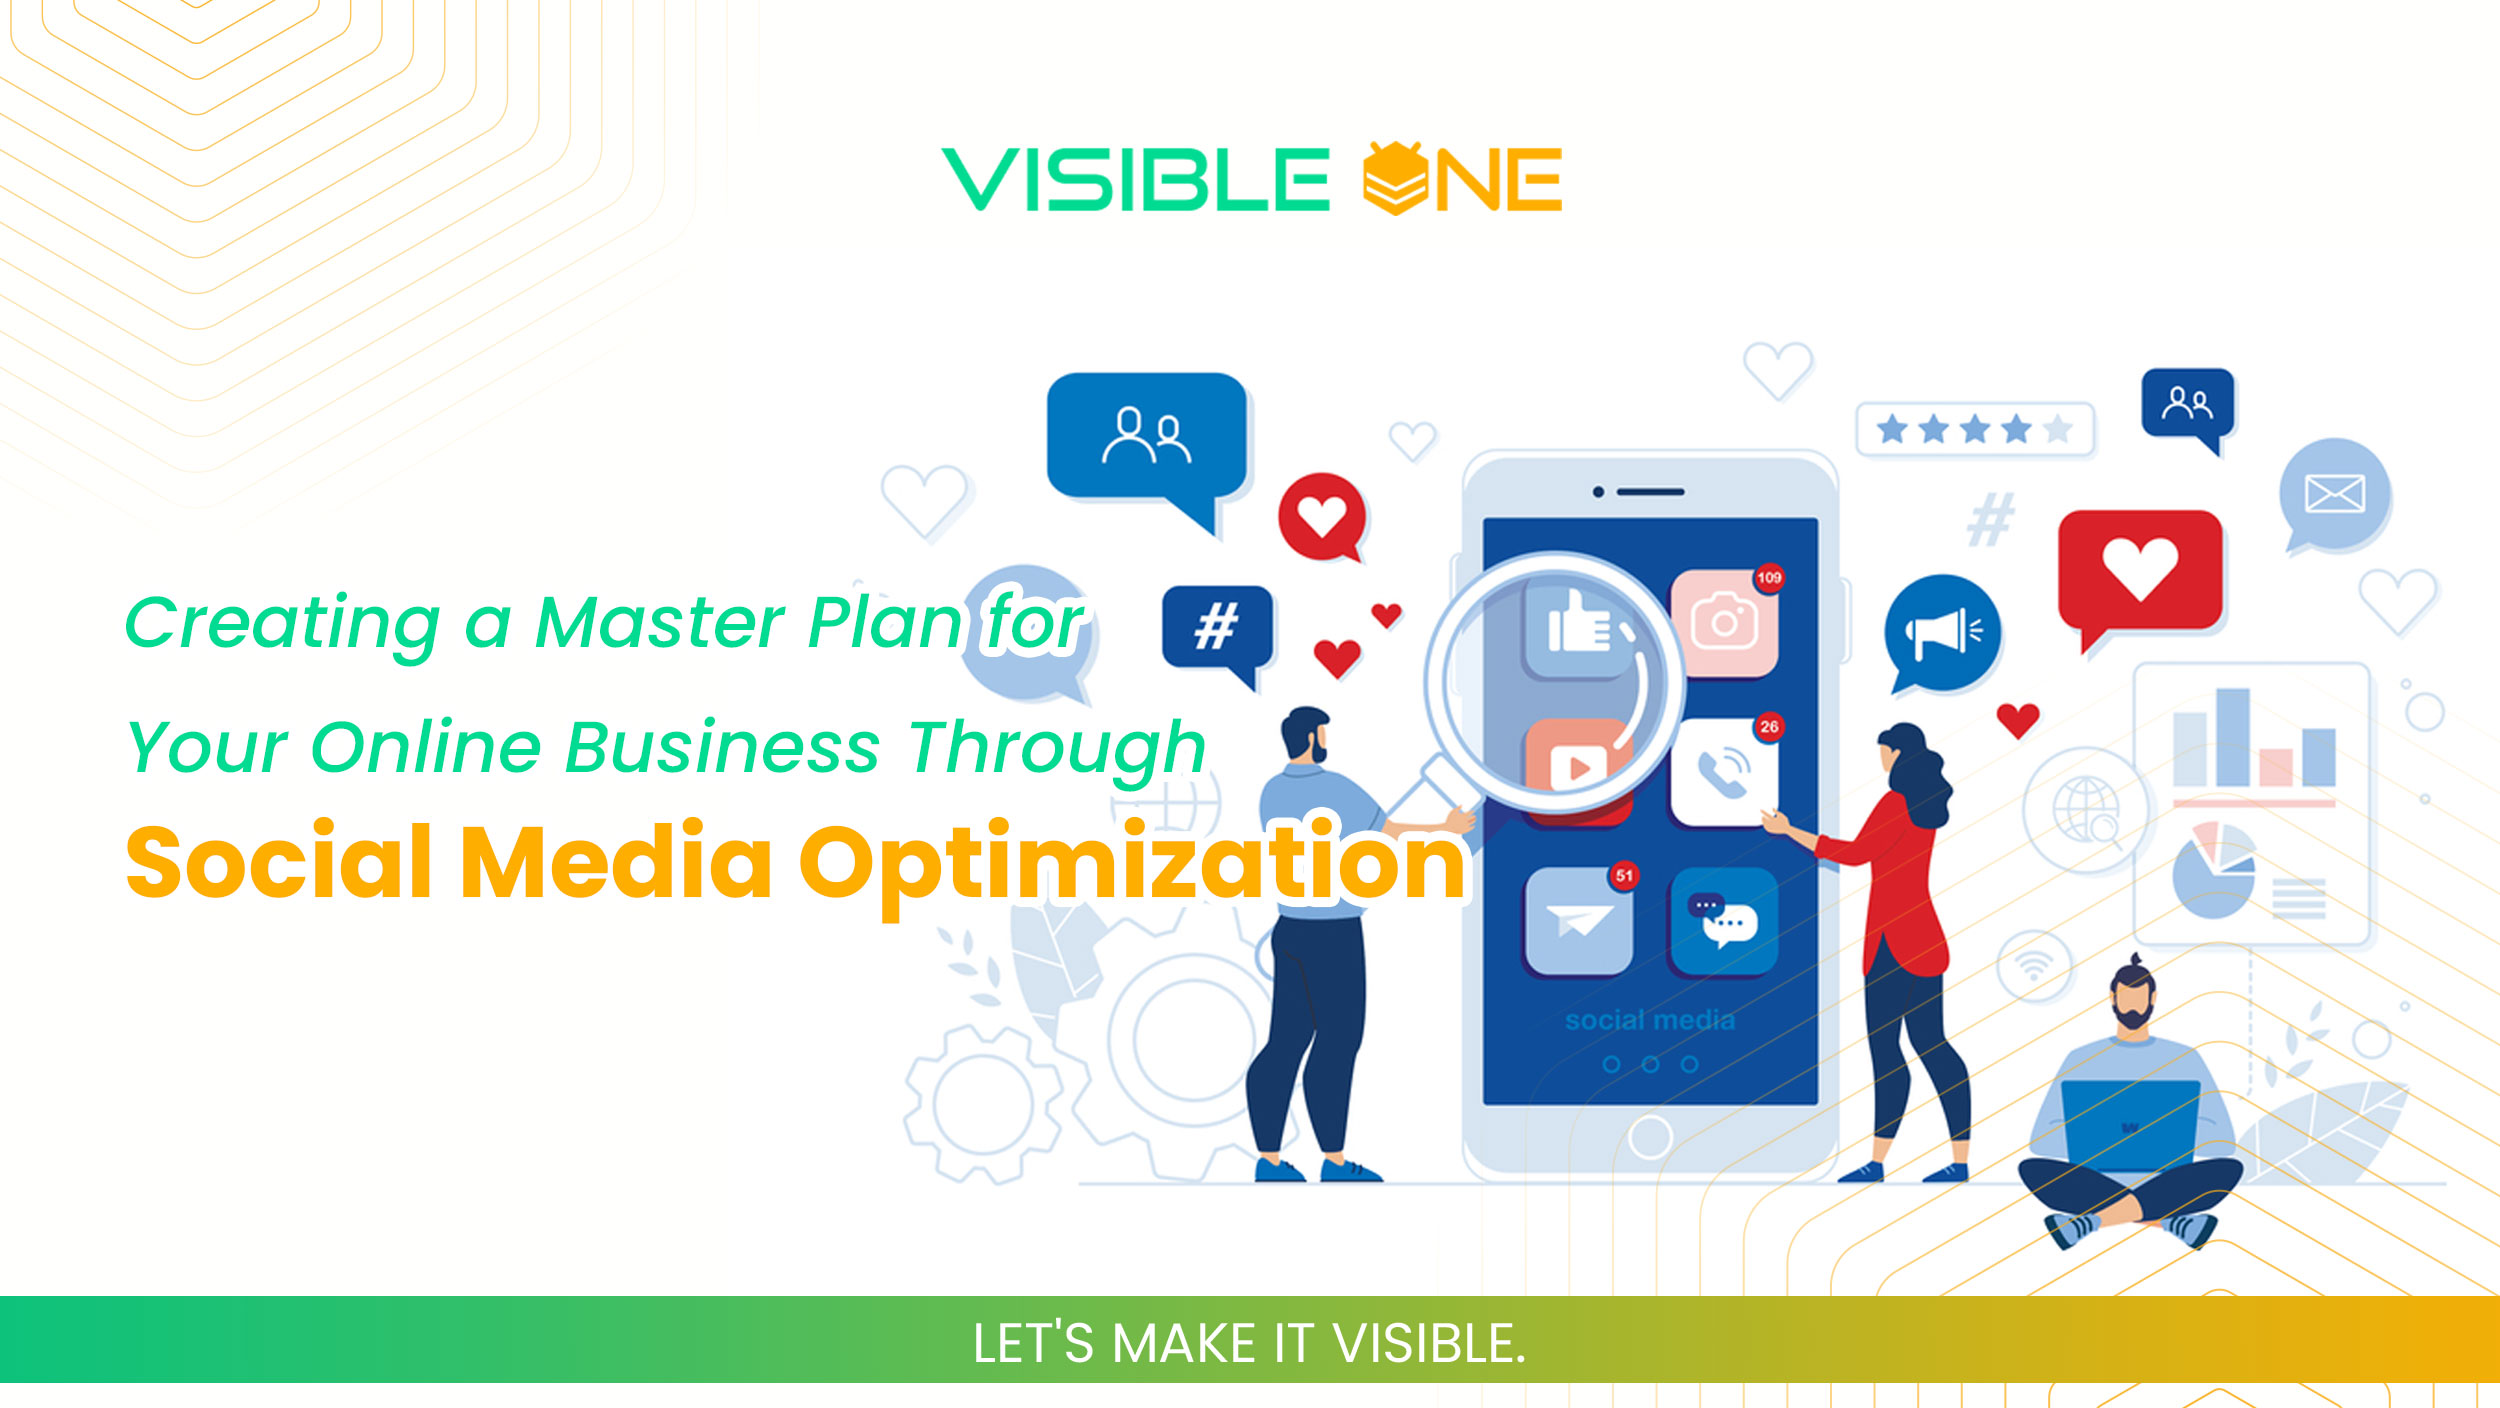 Creating a Master Plan for Your Online Business Through Social Media Optimization